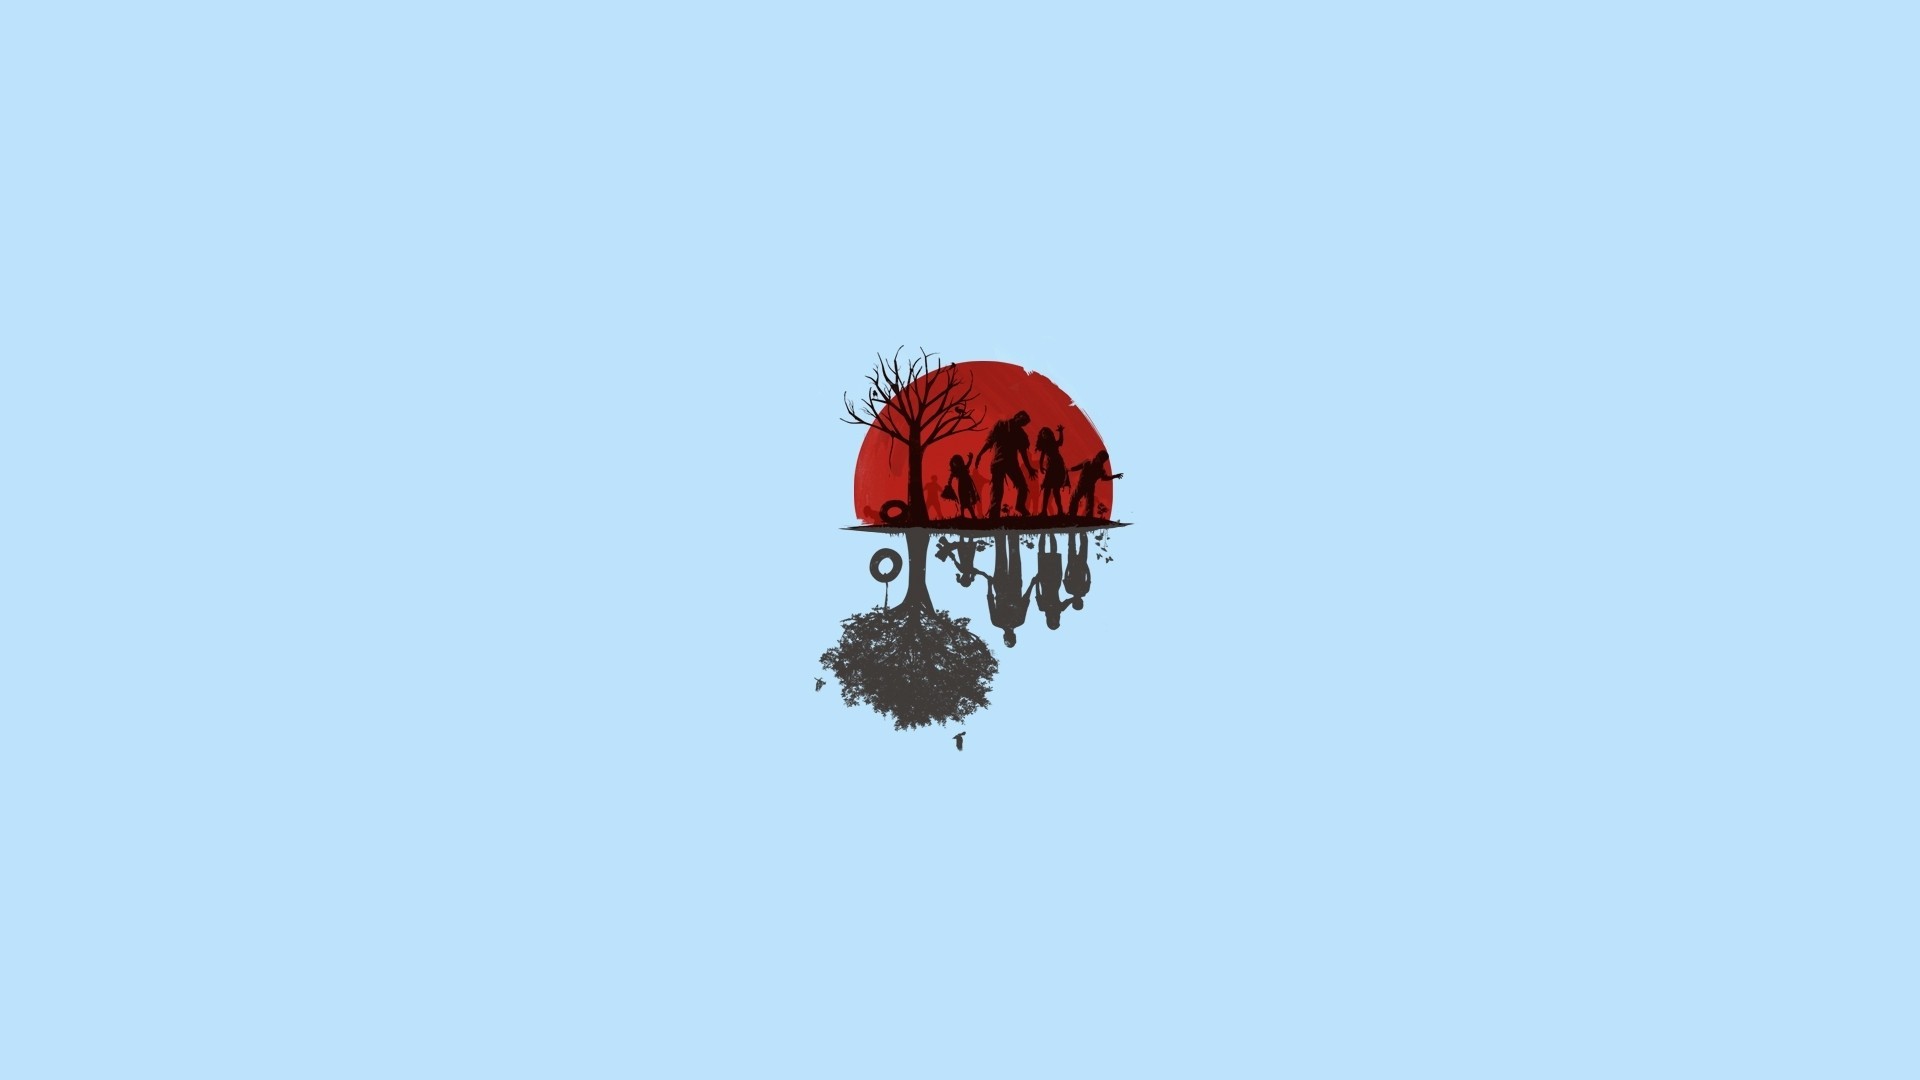 General 1920x1080 undead artwork upside down simple background horror zombies